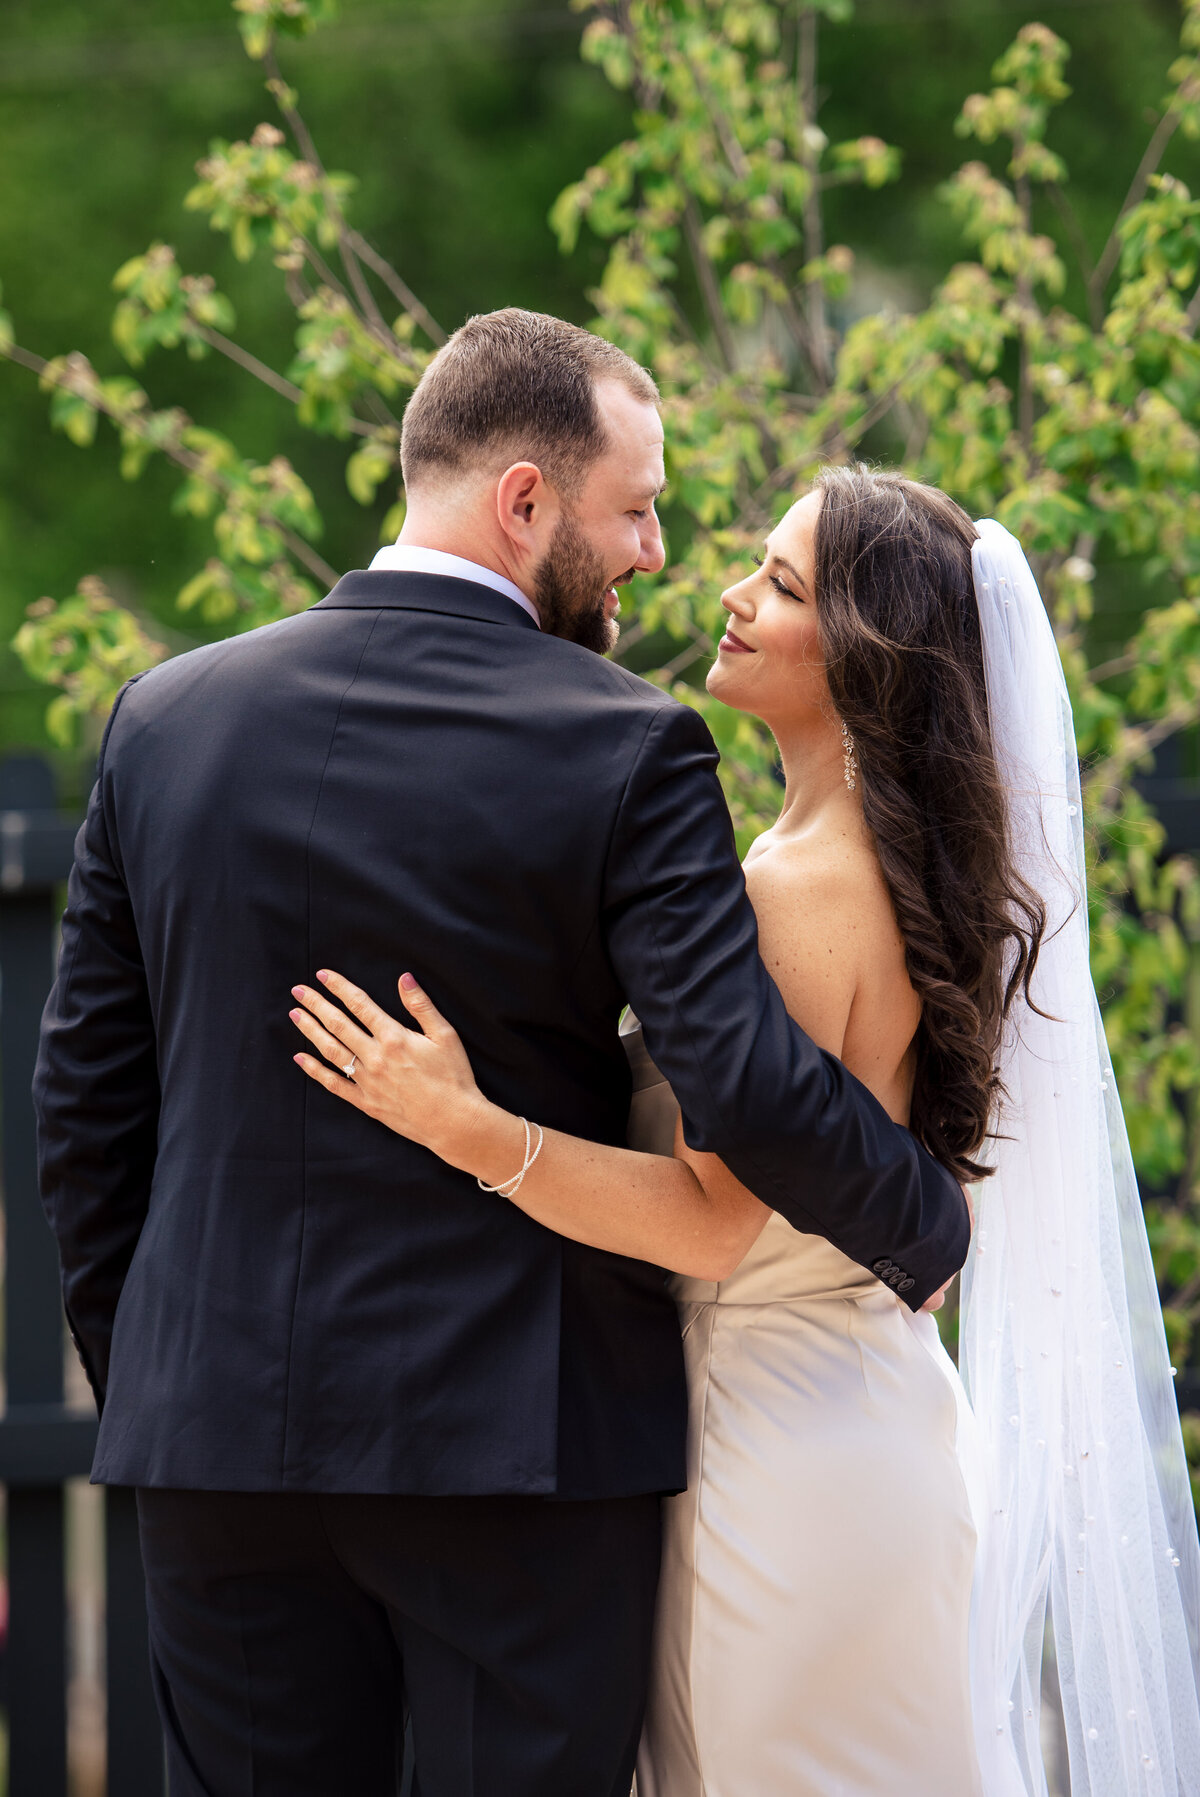 Portrait of bride and groom looking into each other's eyes and smiling with their arms around each other with their backs to the camera amid greenery outside Upstairs Atlanta by Charlotte wedding photographers DeLong Photography